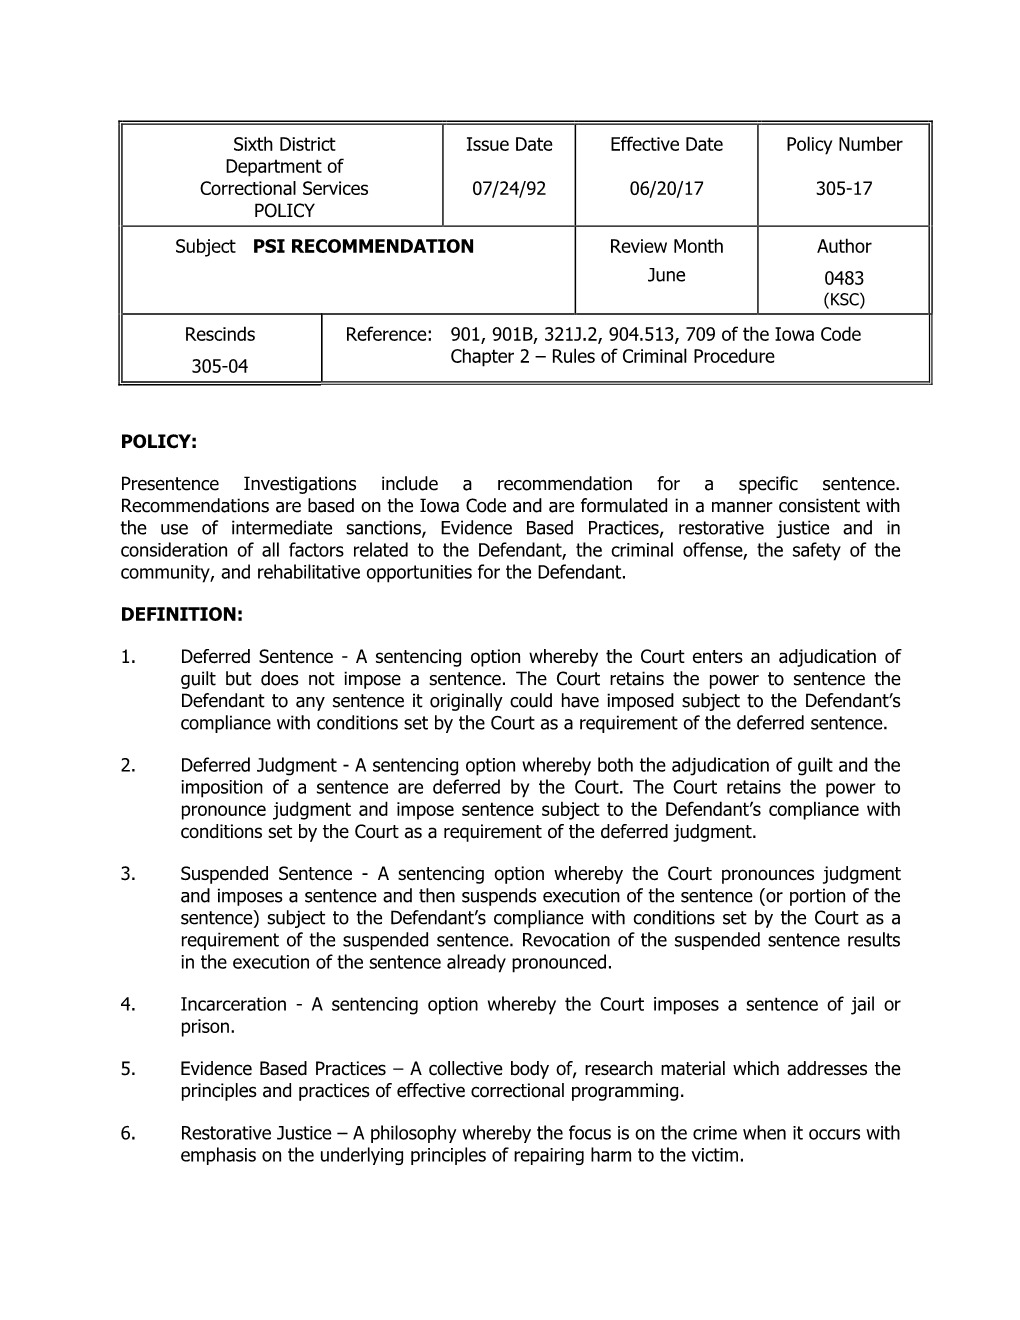 0305-17 PSI Recommendation